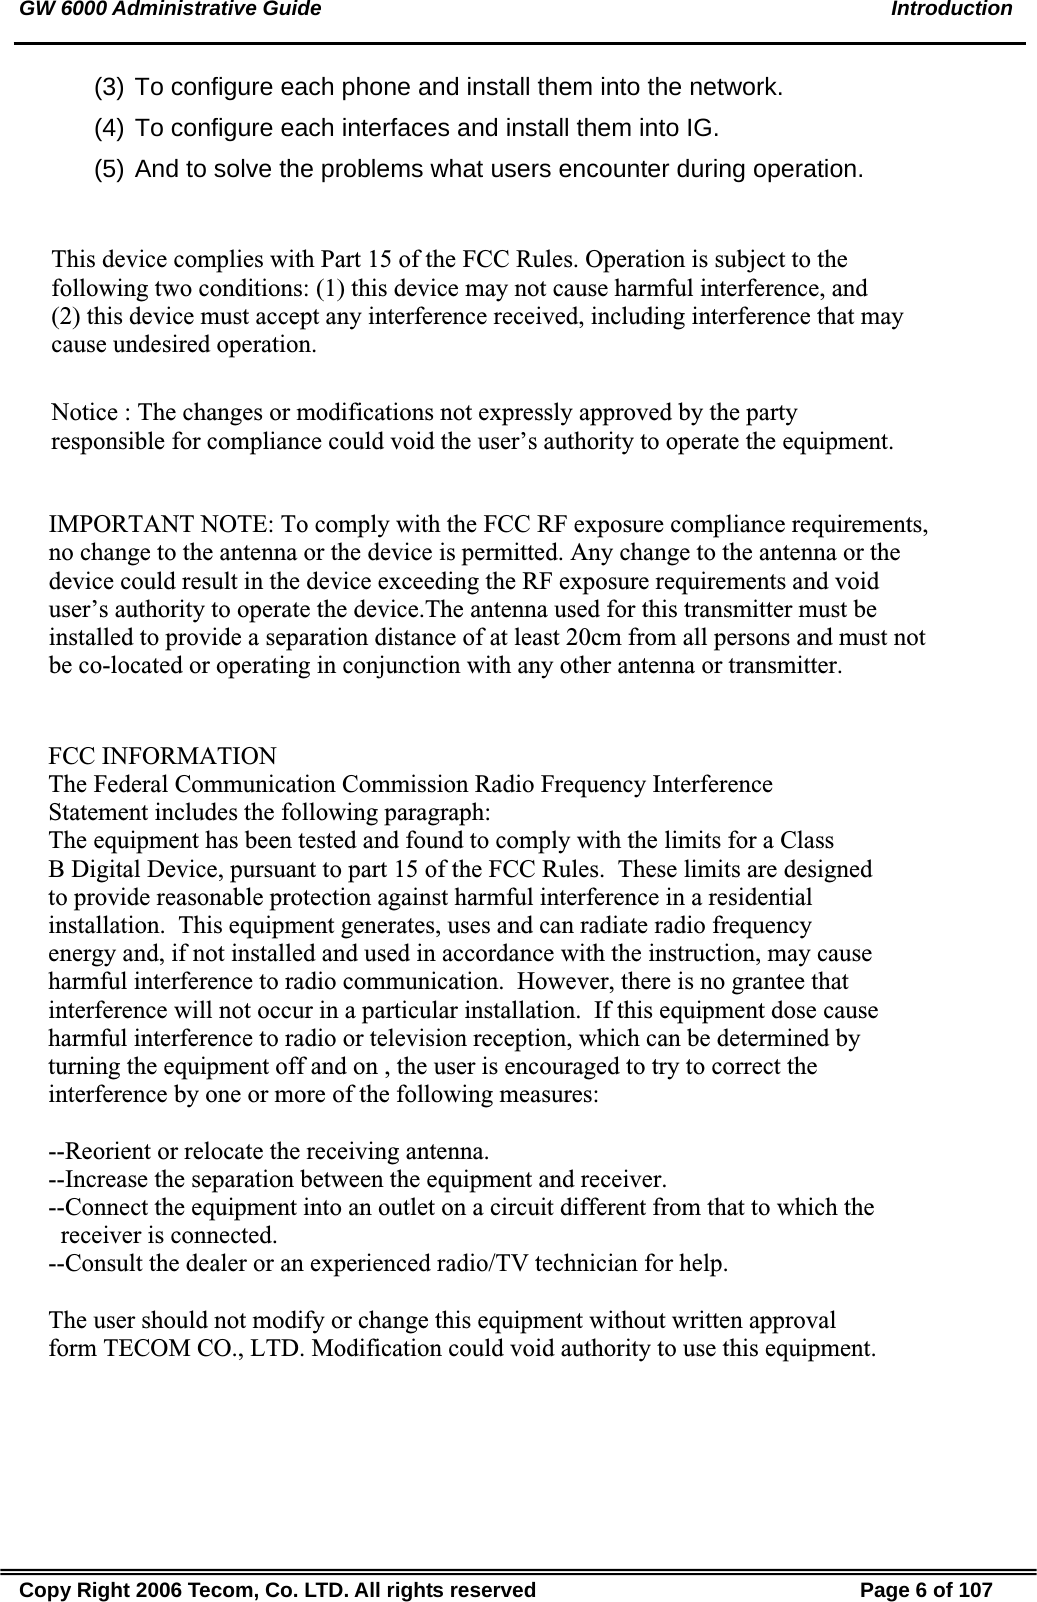 GW 6000 Administrative Guide    Introduction (3) To configure each phone and install them into the network. (4) To configure each interfaces and install them into IG. (5) And to solve the problems what users encounter during operation. Copy Right 2006 Tecom, Co. LTD. All rights reserved  Page 6 of 107 This device complies with Part 15 of the FCC Rules. Operation is subject to the following two conditions: (1) this device may not cause harmful interference, and (2) this device must accept any interference received, including interference that may cause undesired operation.Notice : The changes or modifications not expressly approved by the party responsible for compliance could void the user’s authority to operate the equipment.IMPORTANT NOTE: To comply with the FCC RF exposure compliance requirements, no change to the antenna or the device is permitted. Any change to the antenna or the device could result in the device exceeding the RF exposure requirements and void user’s authority to operate the device.The antenna used for this transmitter must be installed to provide a separation distance of at least 20cm from all persons and must not be co-located or operating in conjunction with any other antenna or transmitter.FCC INFORMATIONThe Federal Communication Commission Radio Frequency InterferenceStatement includes the following paragraph:The equipment has been tested and found to comply with the limits for a ClassB Digital Device, pursuant to part 15 of the FCC Rules.  These limits are designedto provide reasonable protection against harmful interference in a residentialinstallation.  This equipment generates, uses and can radiate radio frequencyenergy and, if not installed and used in accordance with the instruction, may causeharmful interference to radio communication.  However, there is no grantee thatinterference will not occur in a particular installation.  If this equipment dose causeharmful interference to radio or television reception, which can be determined by turning the equipment off and on , the user is encouraged to try to correct the interference by one or more of the following measures:--Reorient or relocate the receiving antenna.--Increase the separation between the equipment and receiver.--Connect the equipment into an outlet on a circuit different from that to which the   receiver is connected.--Consult the dealer or an experienced radio/TV technician for help.The user should not modify or change this equipment without written approvalform TECOM CO., LTD. Modification could void authority to use this equipment.